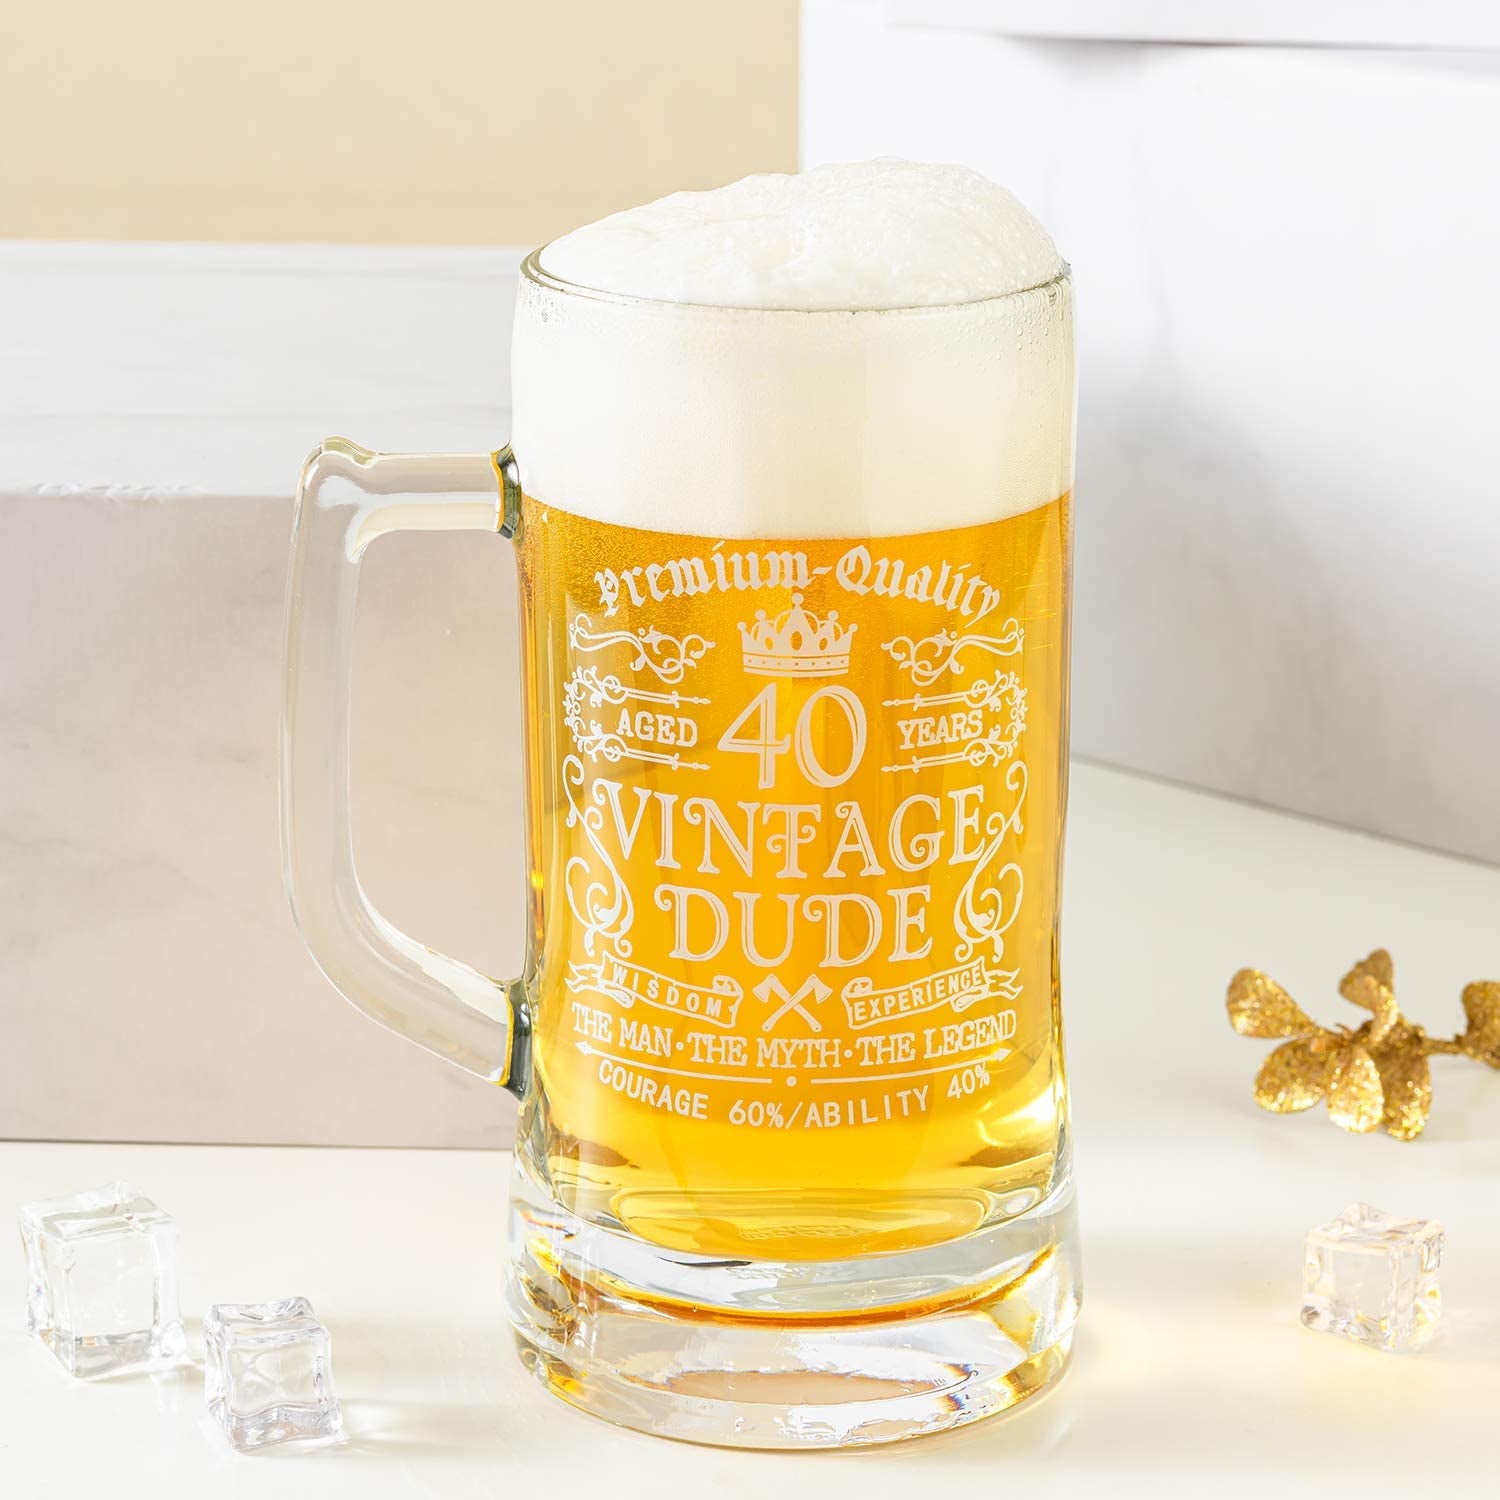 40Th Birthday Vintage Dude Beer Mug for Men 40 Years Old Gift 21 Oz Birthday Beer Glass for Him, Husband, Father, Brother Friends Uncle Coworker, Large Capacity Beer Mug Gift, with Box